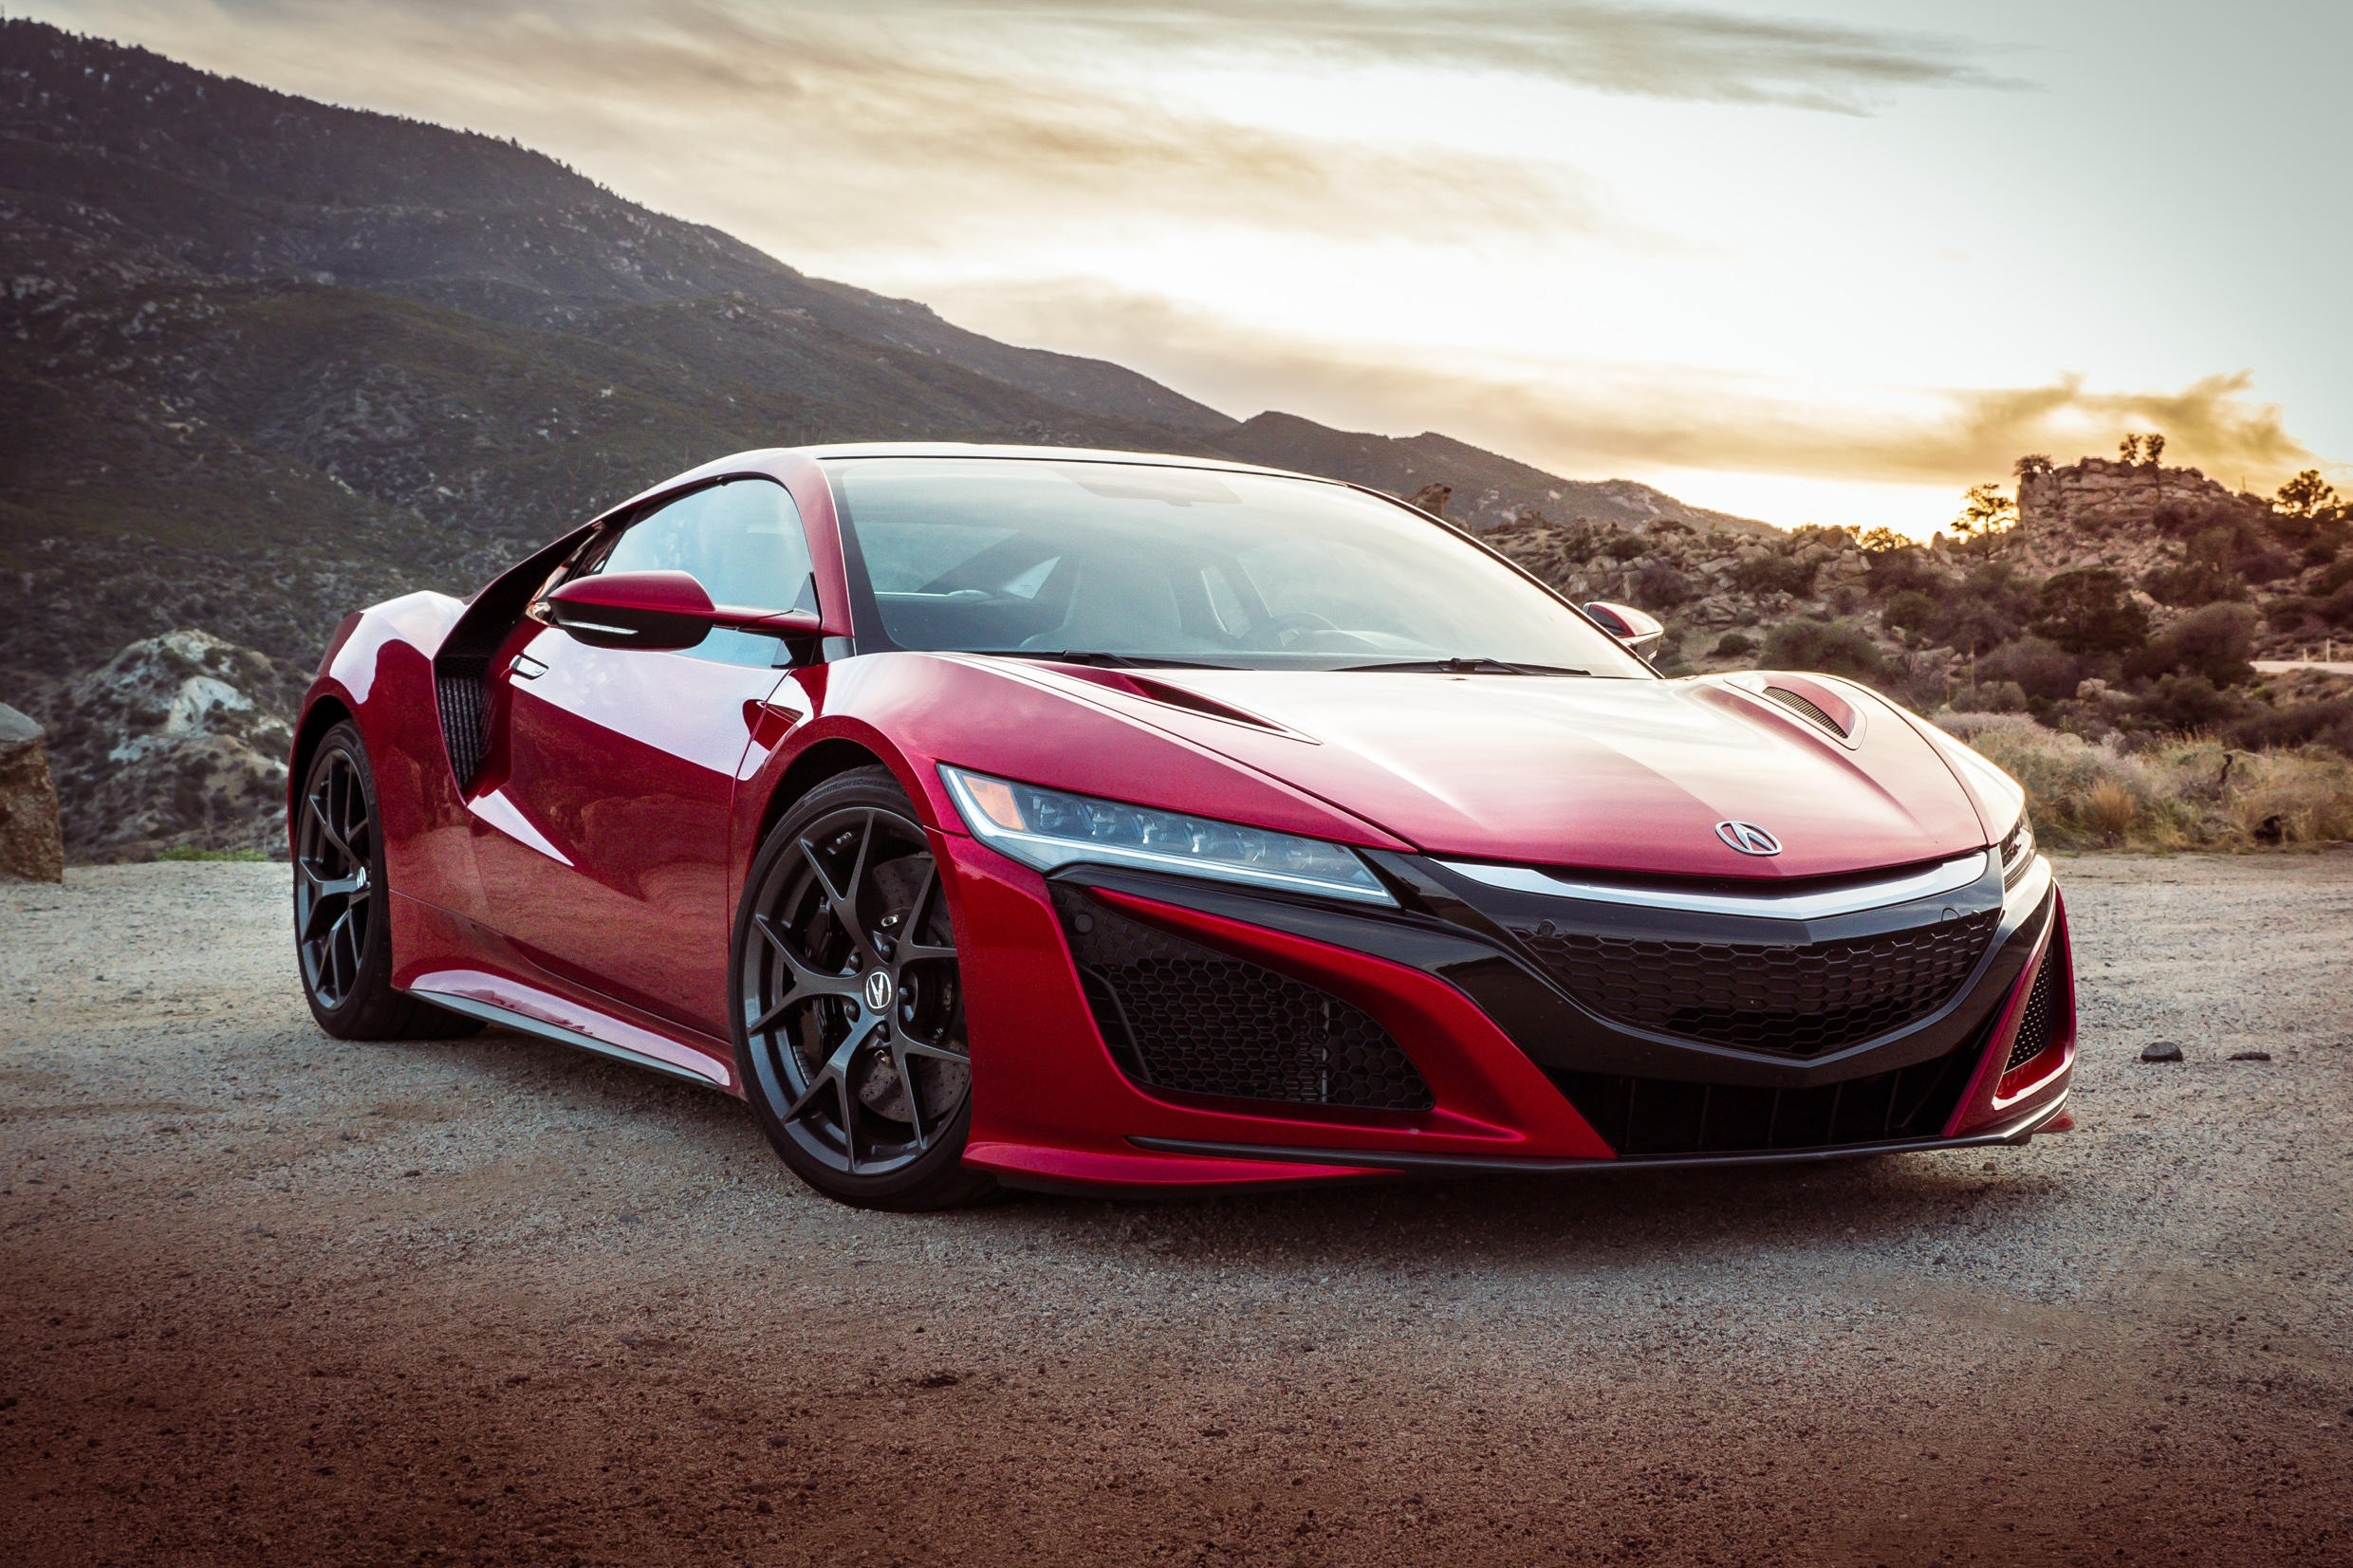 2017 acura nsx, hd cars, 4k wallpapers, images, backgrounds, photos